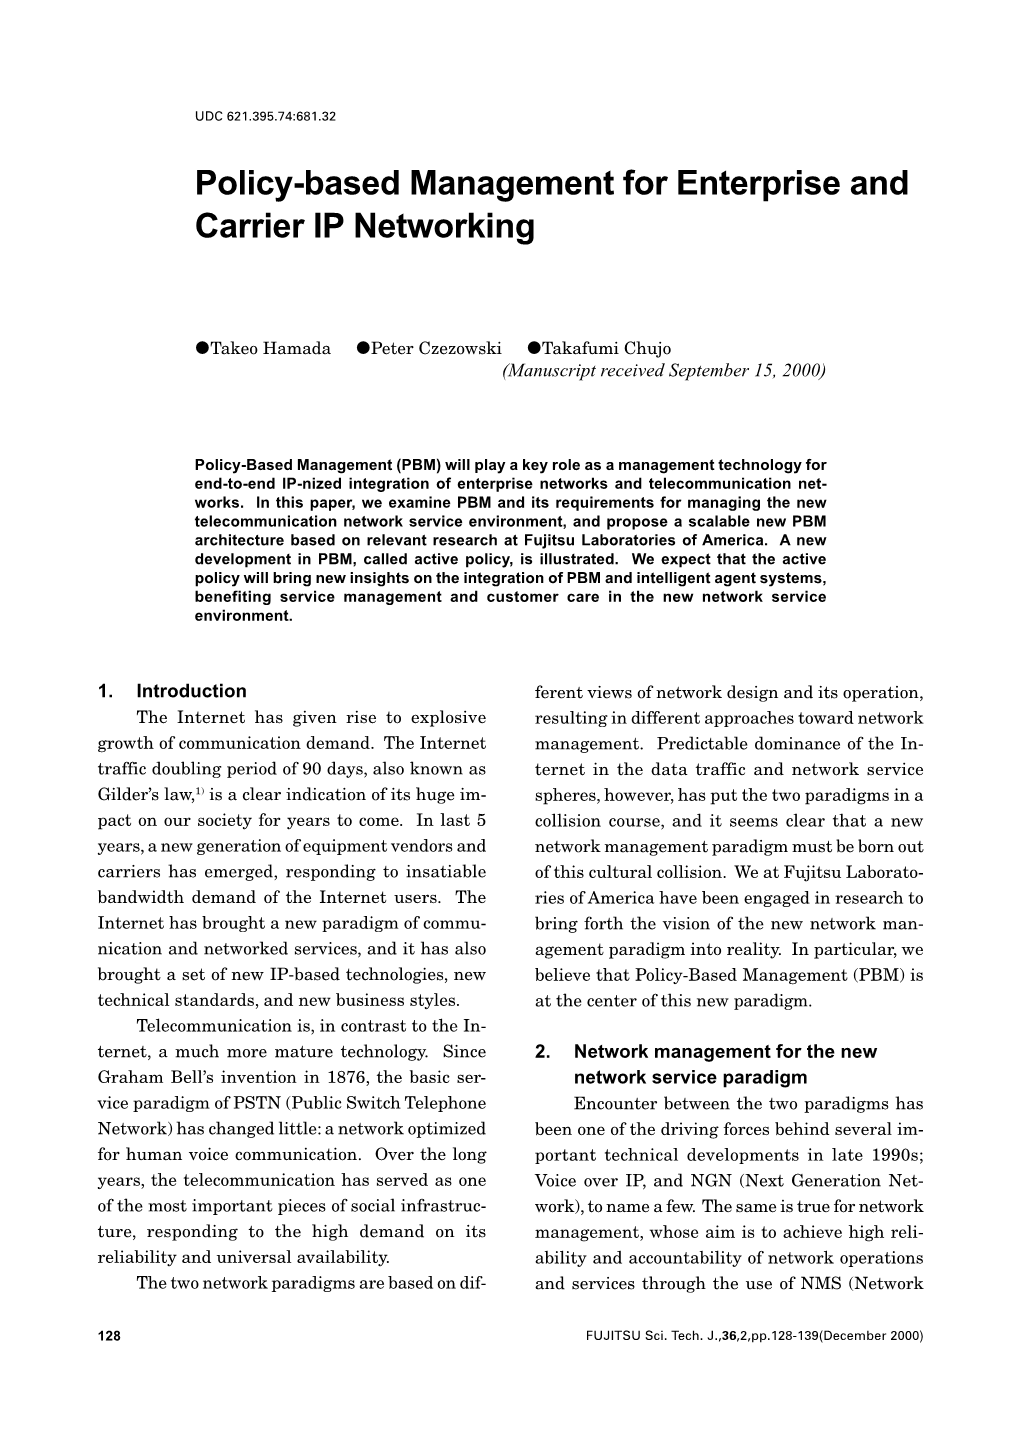 Policy-Based Management for Enterprise and Carrier IP Networking